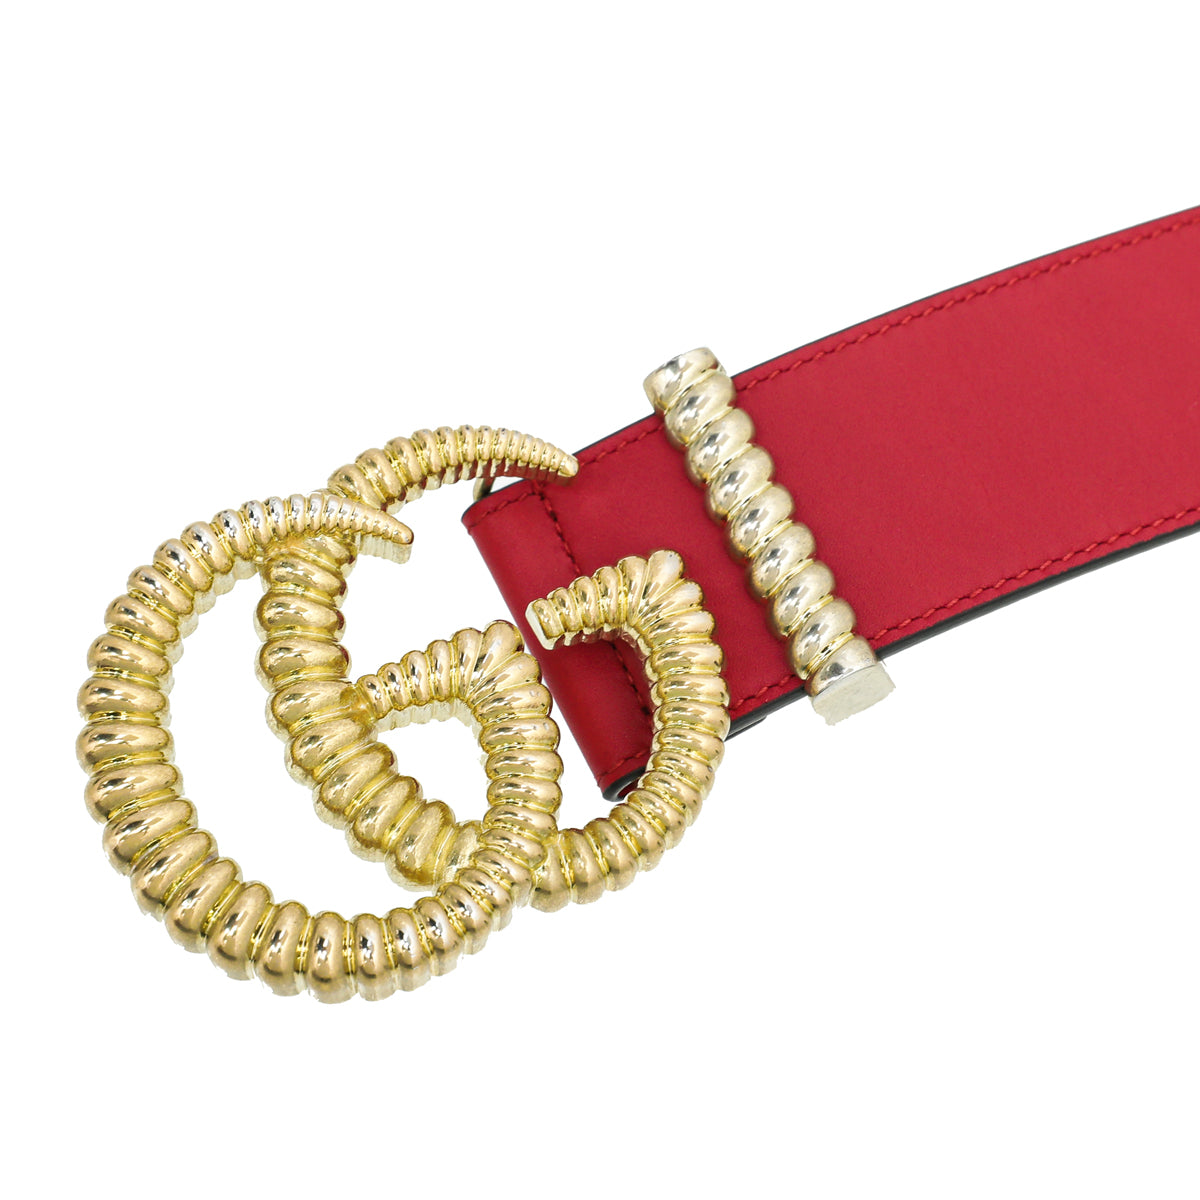 Gucci Red Double G Torchon Leather Belt 36